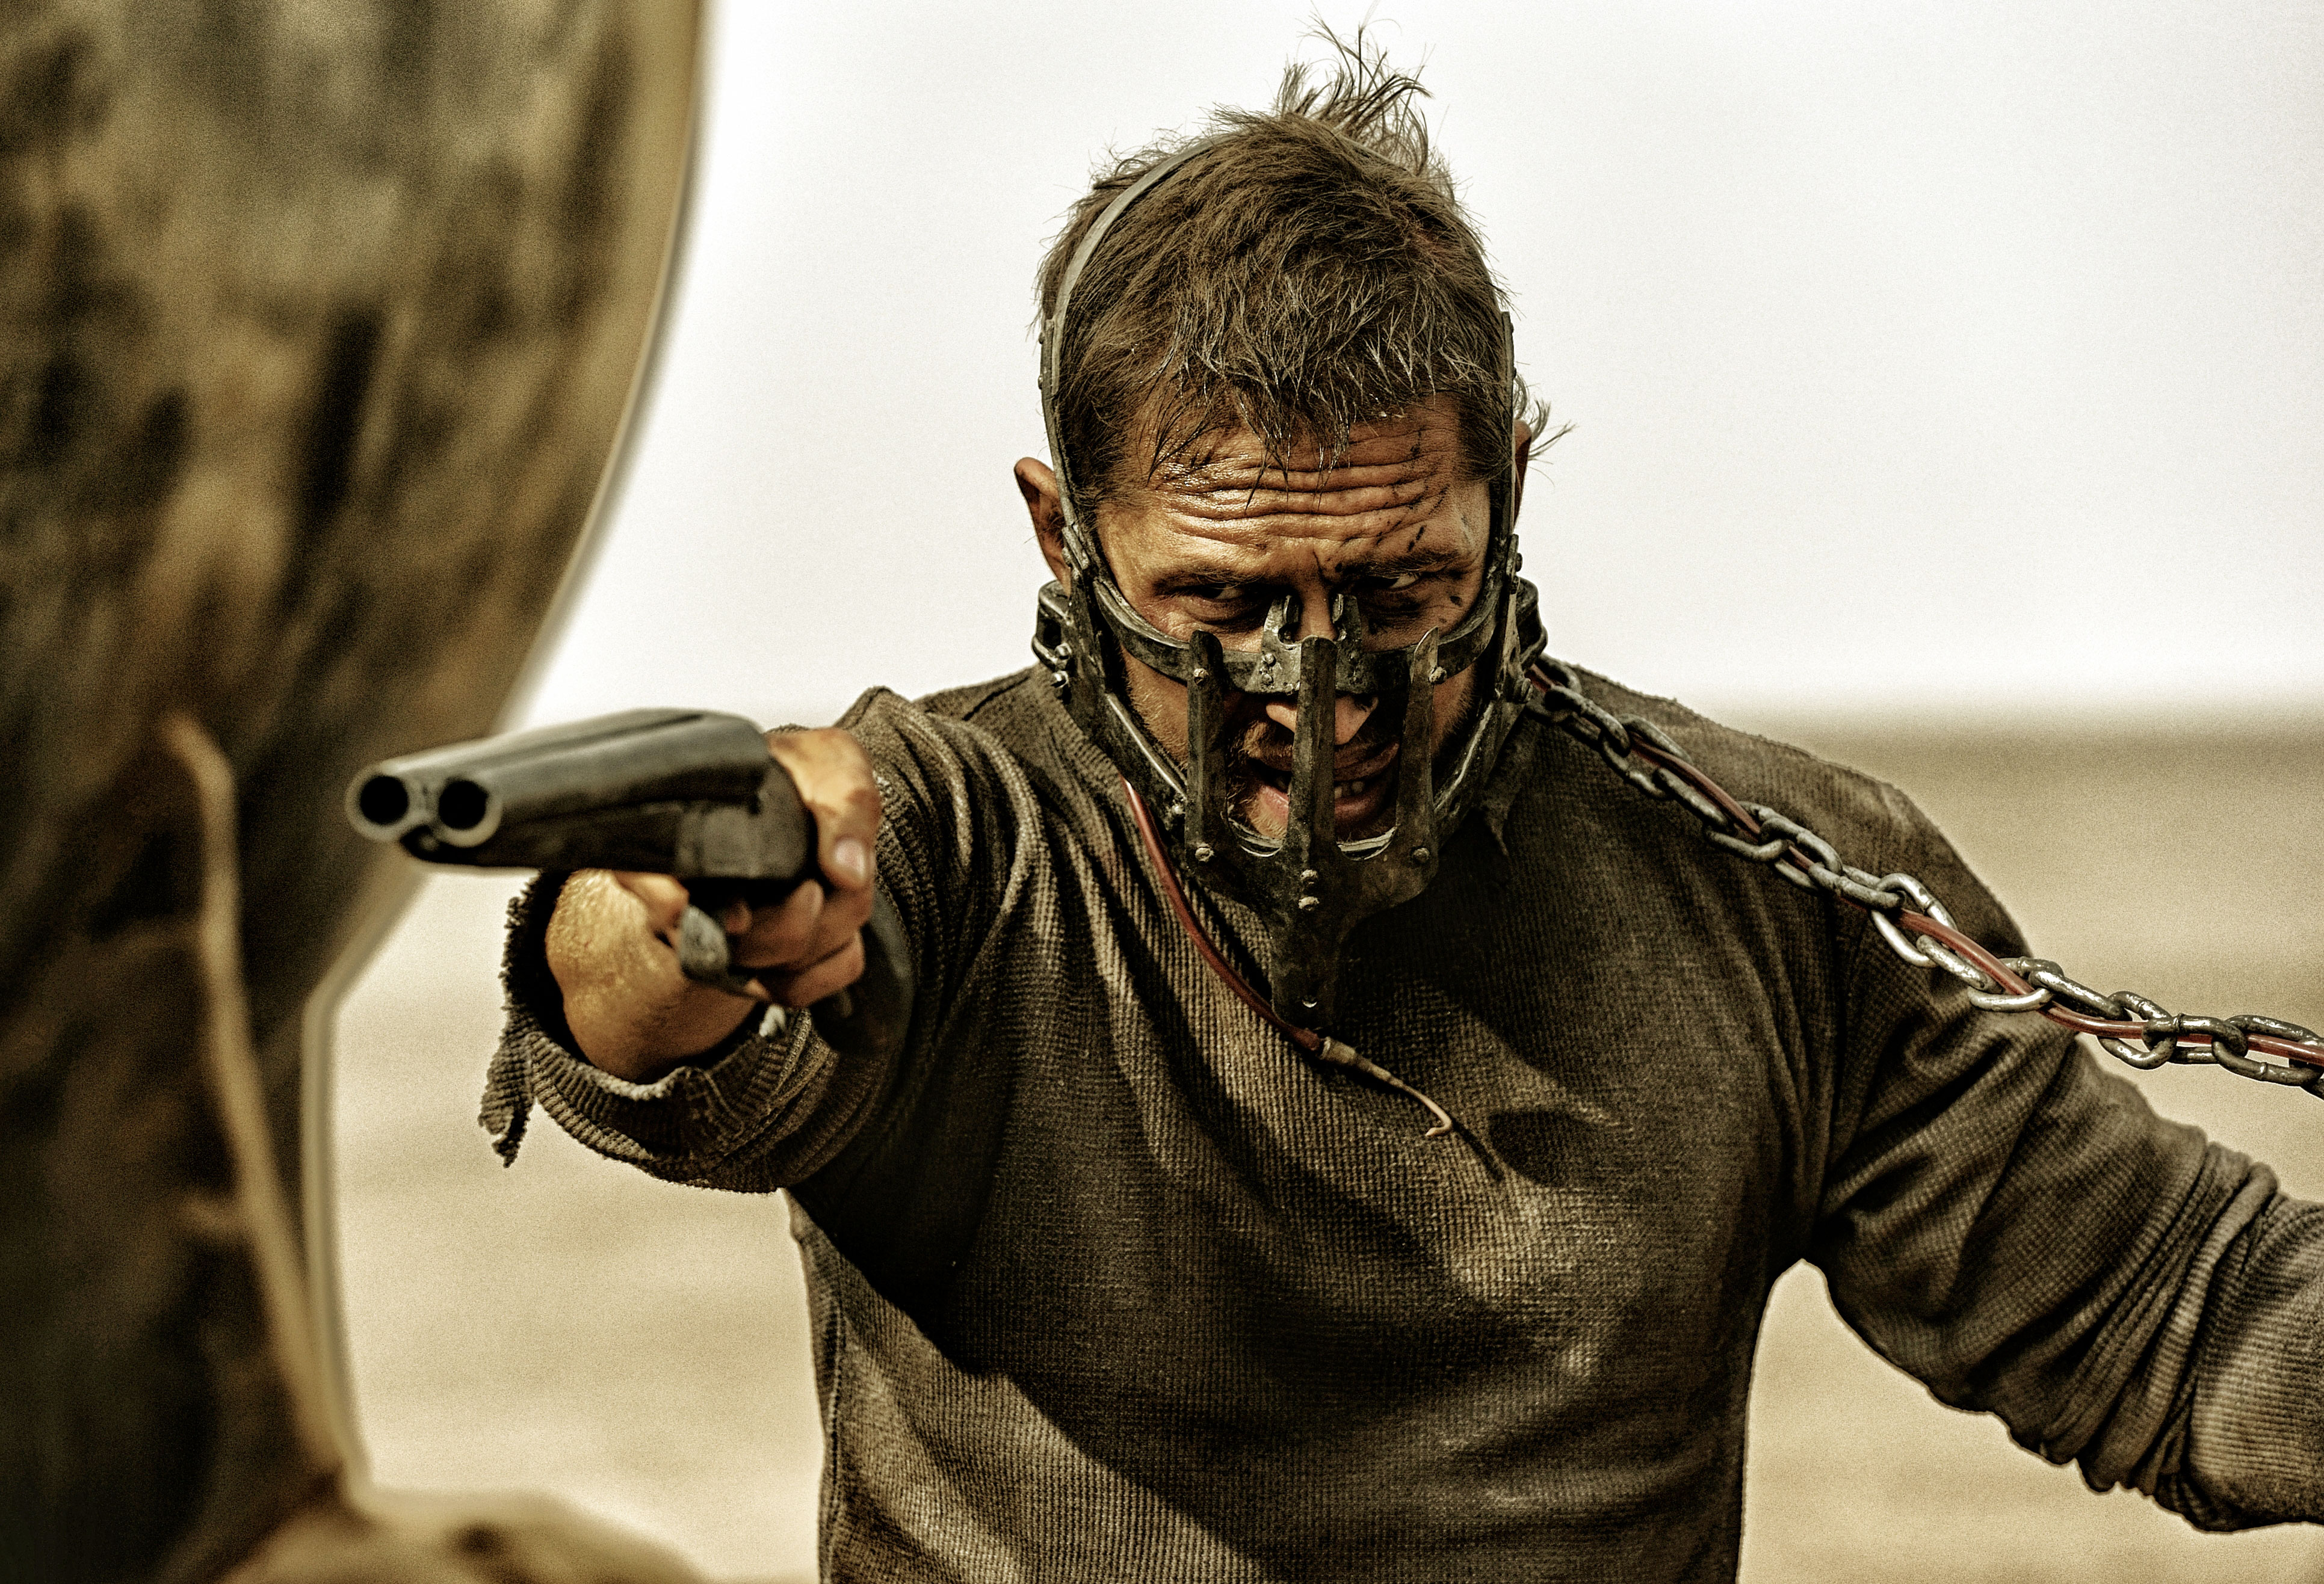 mad-max-fury-road-image-tom-hardy-5 - Trailers From Hell